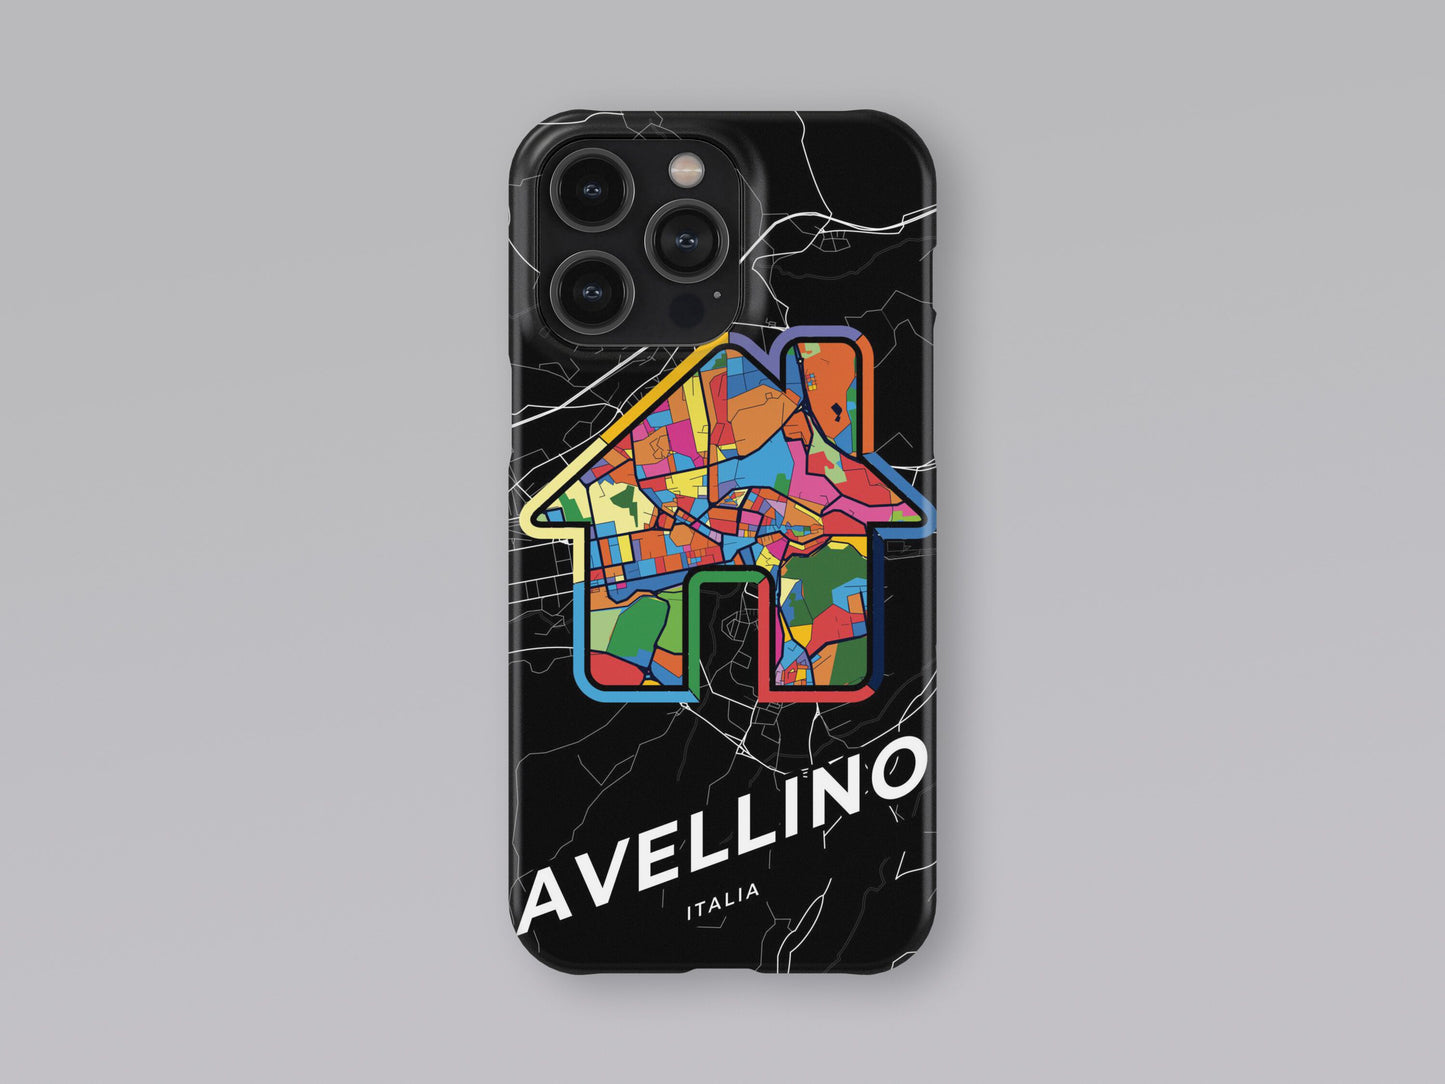 Avellino Italy slim phone case with colorful icon. Birthday, wedding or housewarming gift. Couple match cases. 3